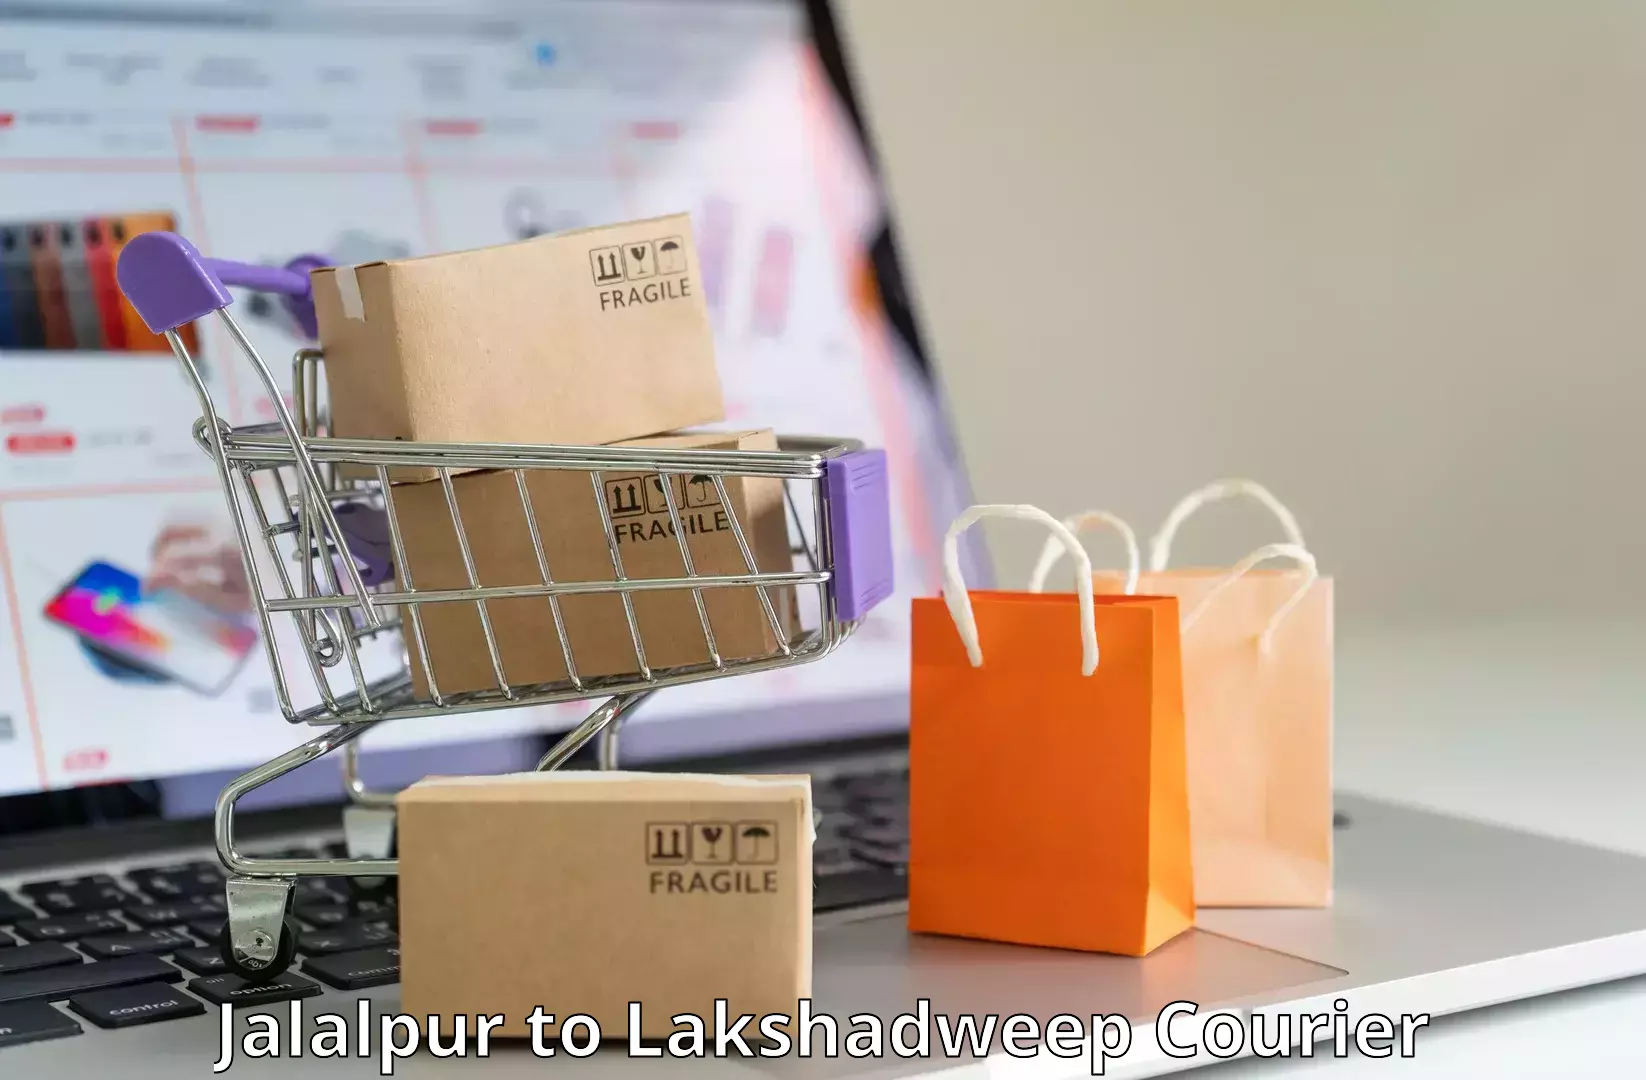 Domestic delivery options Jalalpur to Lakshadweep